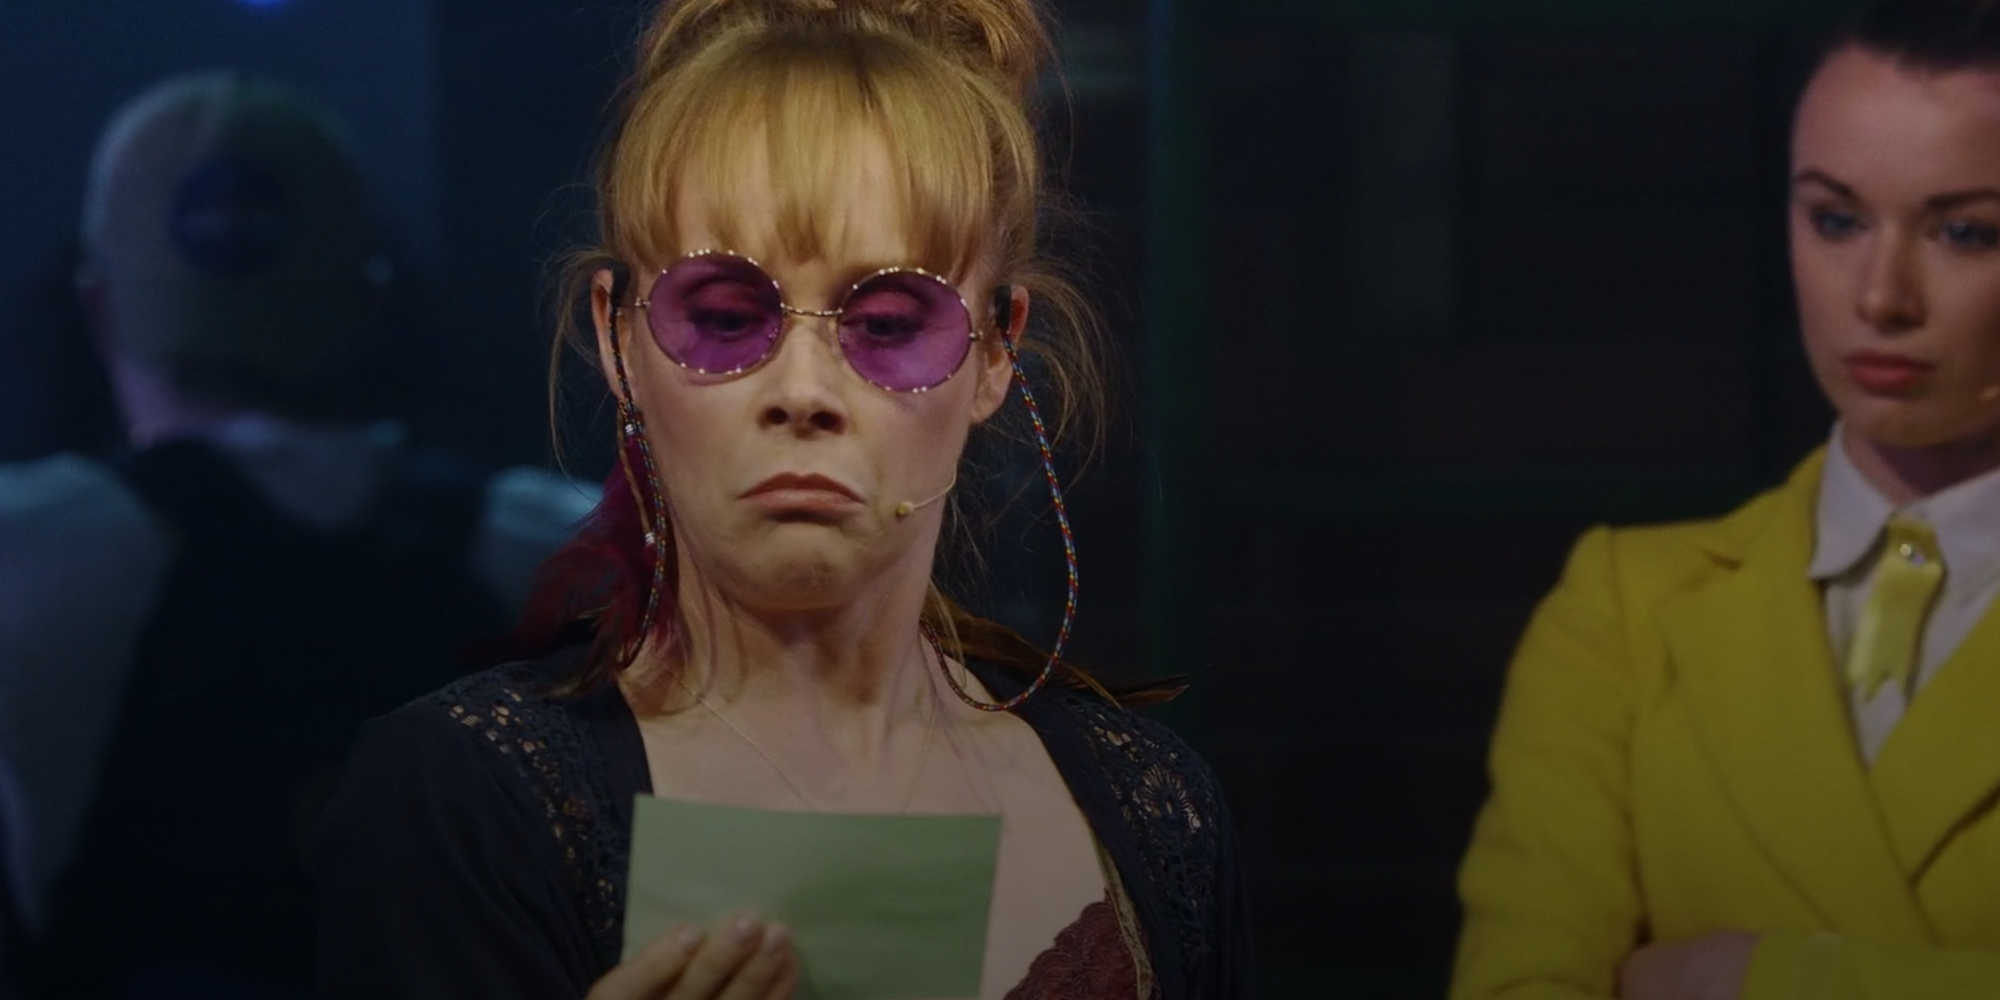 Pauline Fleming looking at a forged hall pass in Heathers: The Musical